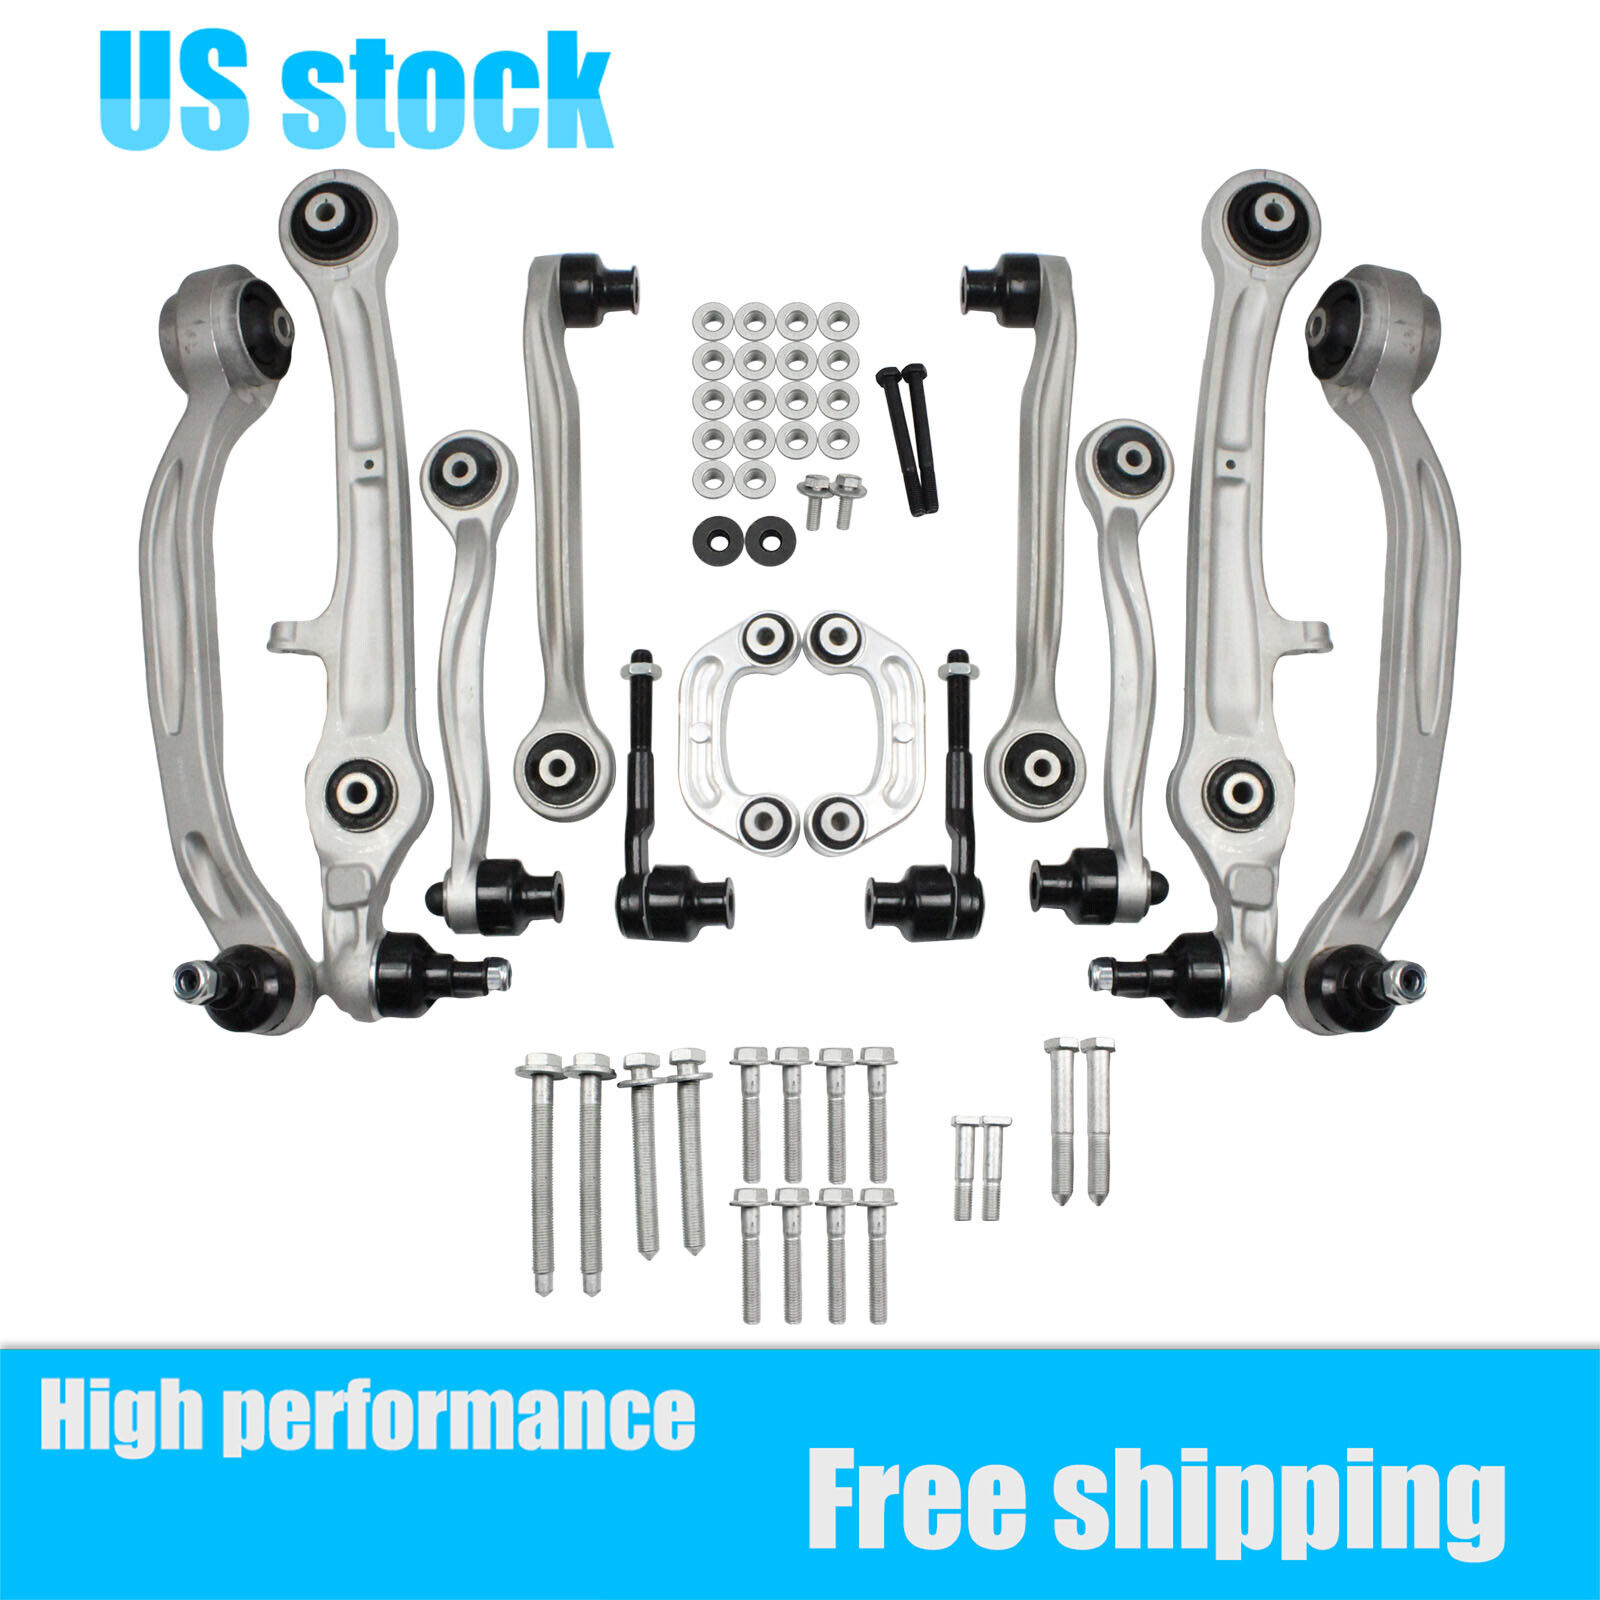 Fits Audi A6 A6 Quattro S6 Control Arm Ball Joint Tie Rod Sway Bar Kit Set of 12